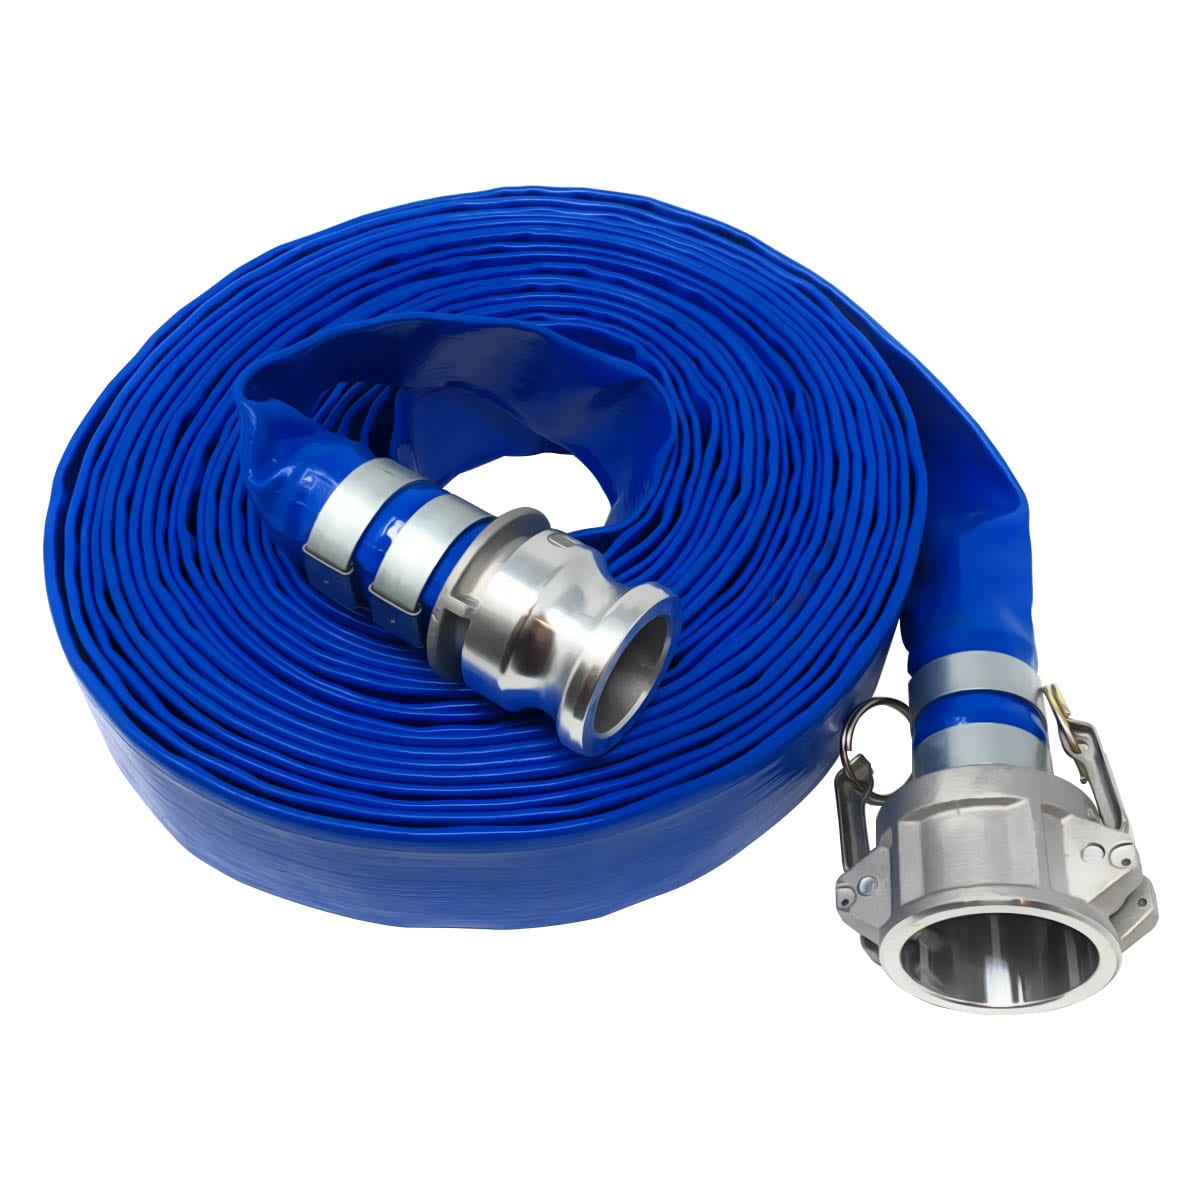 Apache 98138015 1-1/2 x 50 Blue PVC Lay-Flat Discharge Hose with Aluminum Pin Lug Fittings 